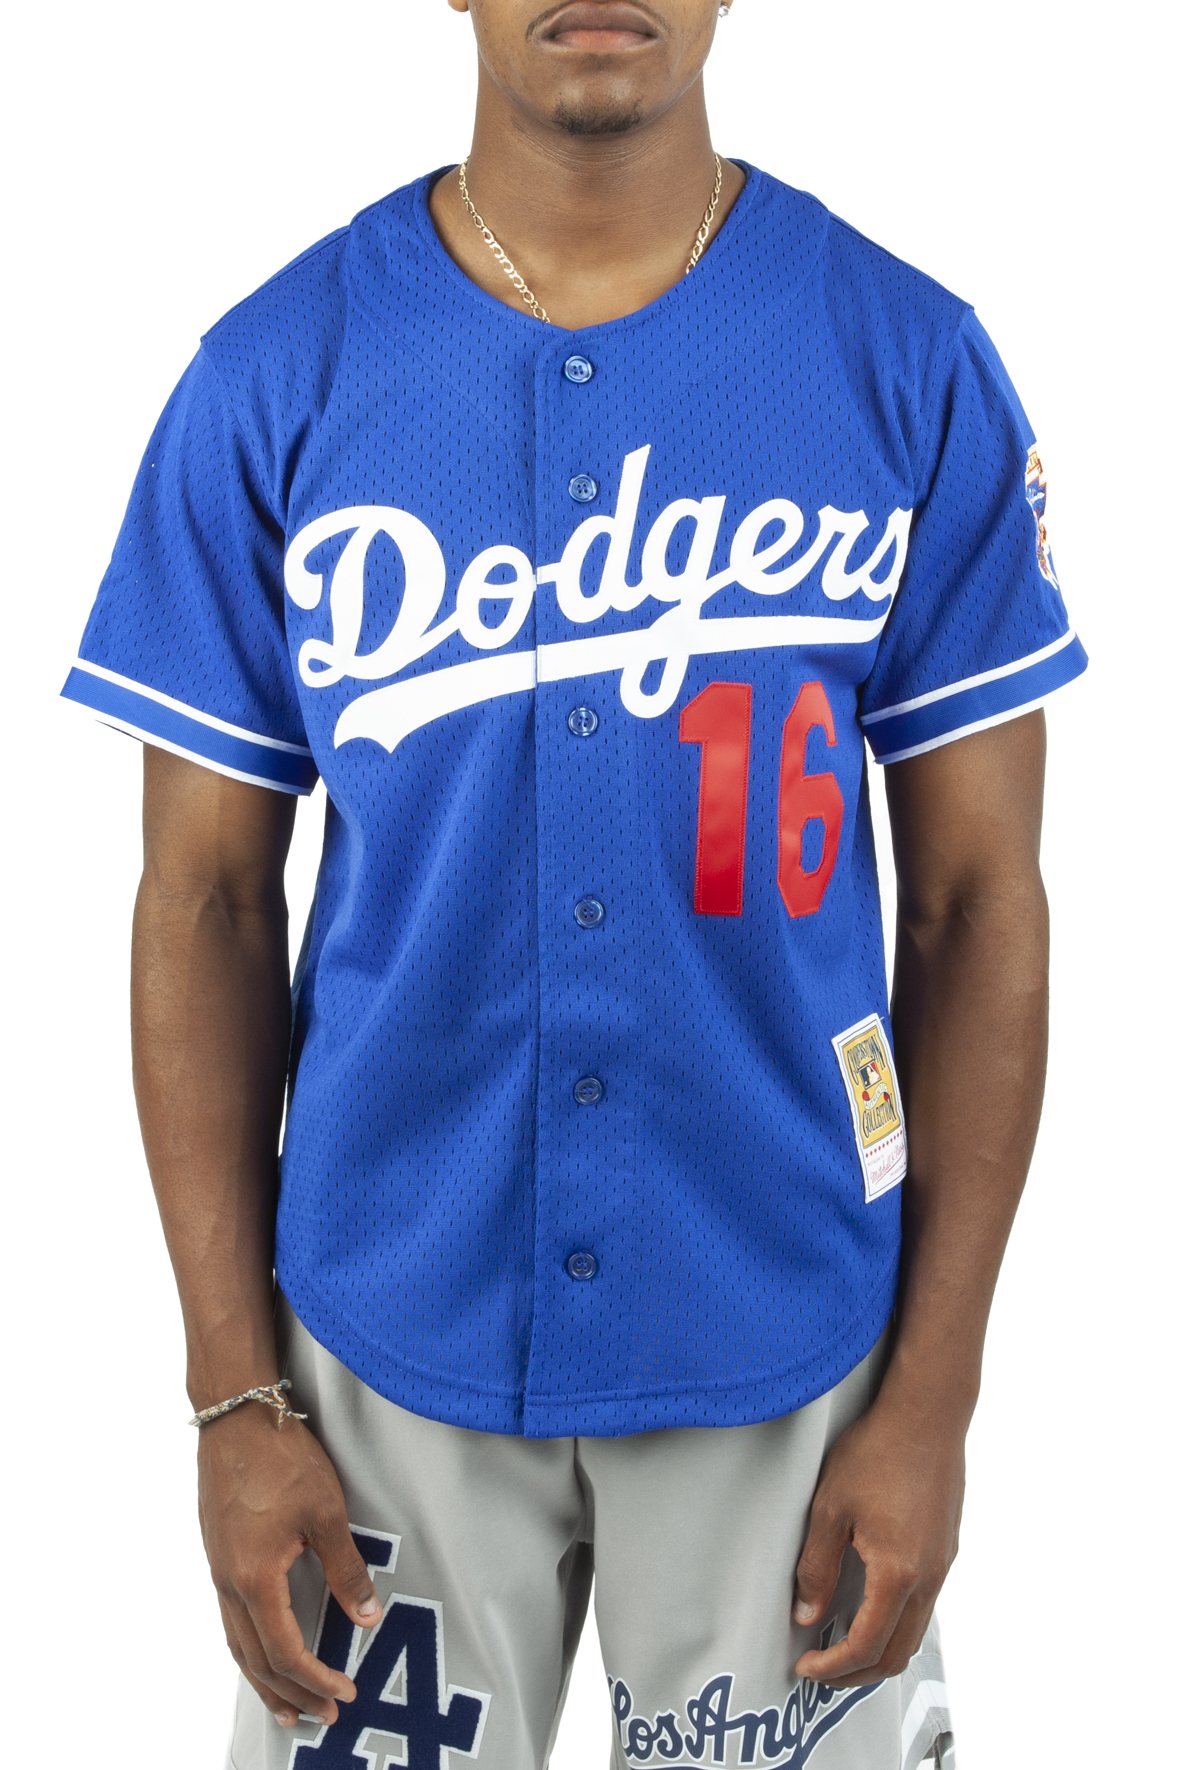 HIDEO NOMO Los Angeles DODGERS Baseball Mitchell & Ness S Cooperstown Jersey  NEW